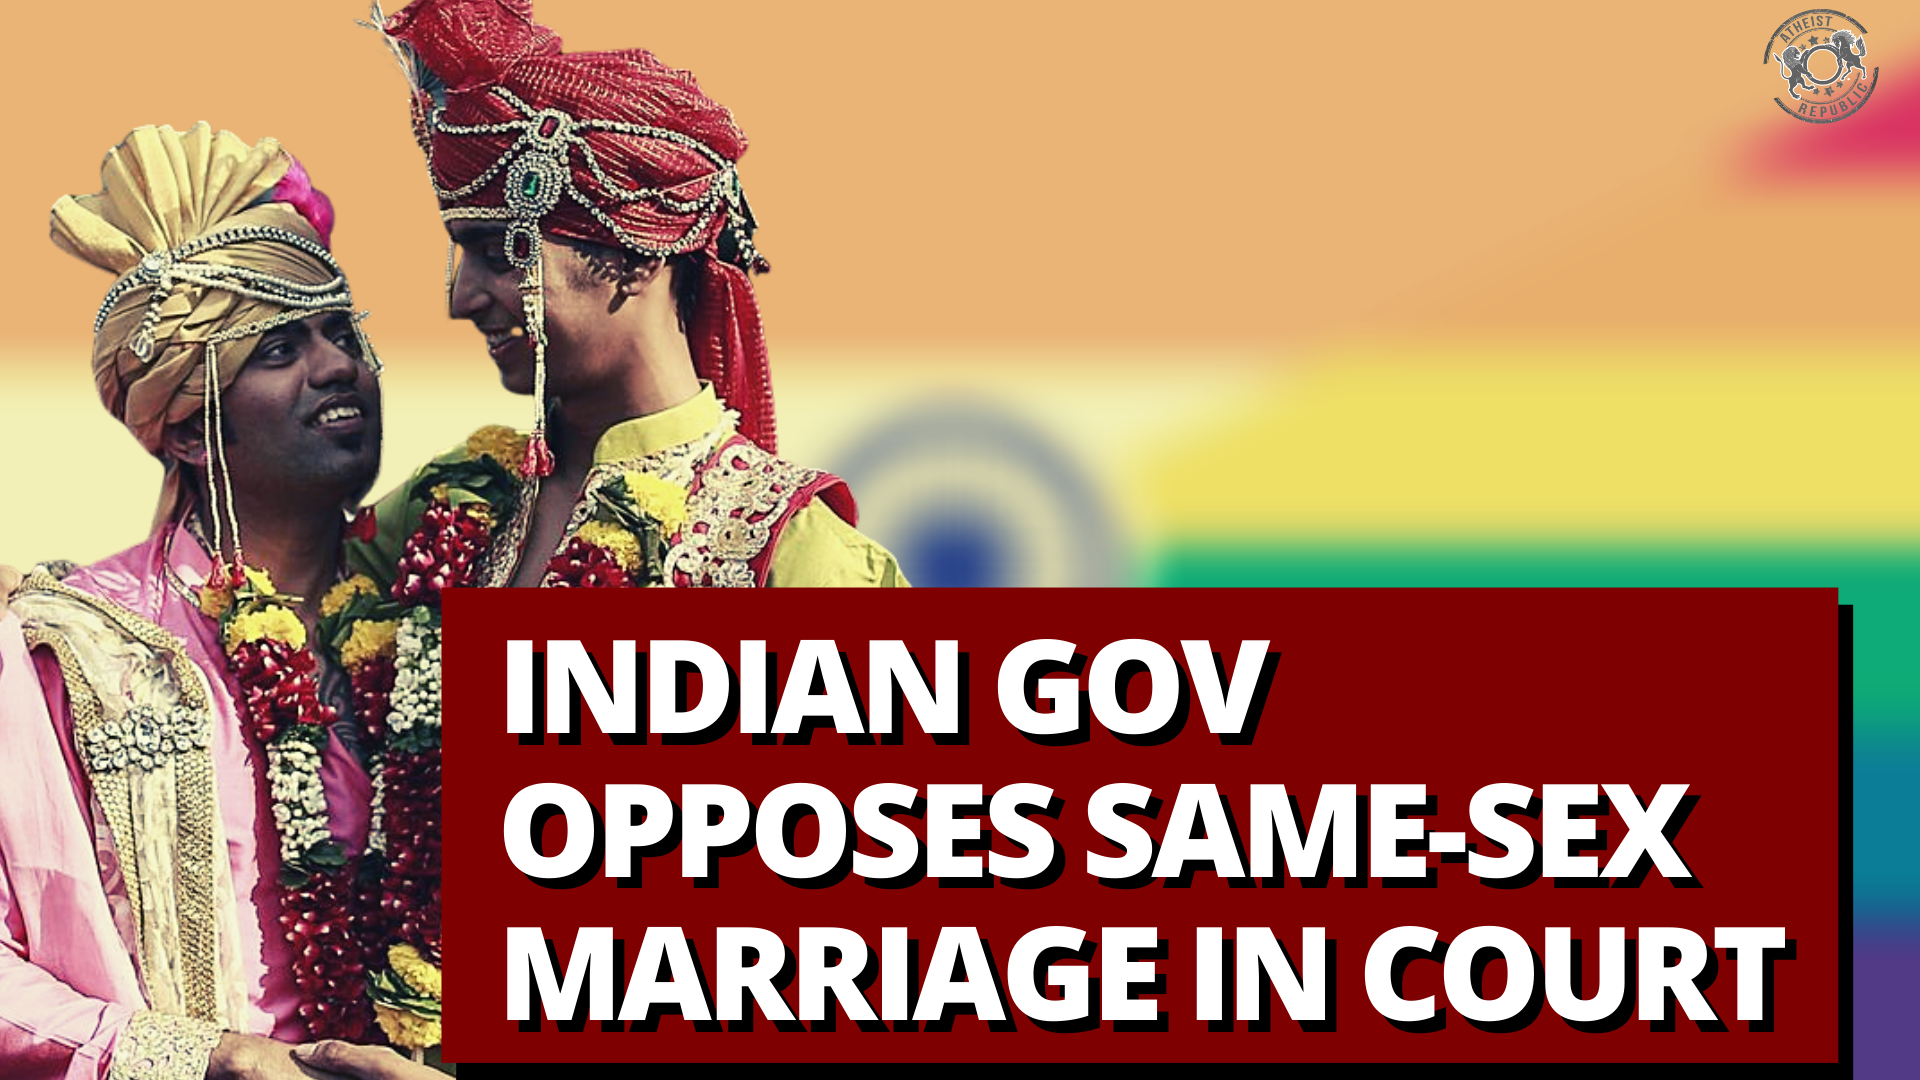 Indian Gov Opposes SameSex Marriage in Court